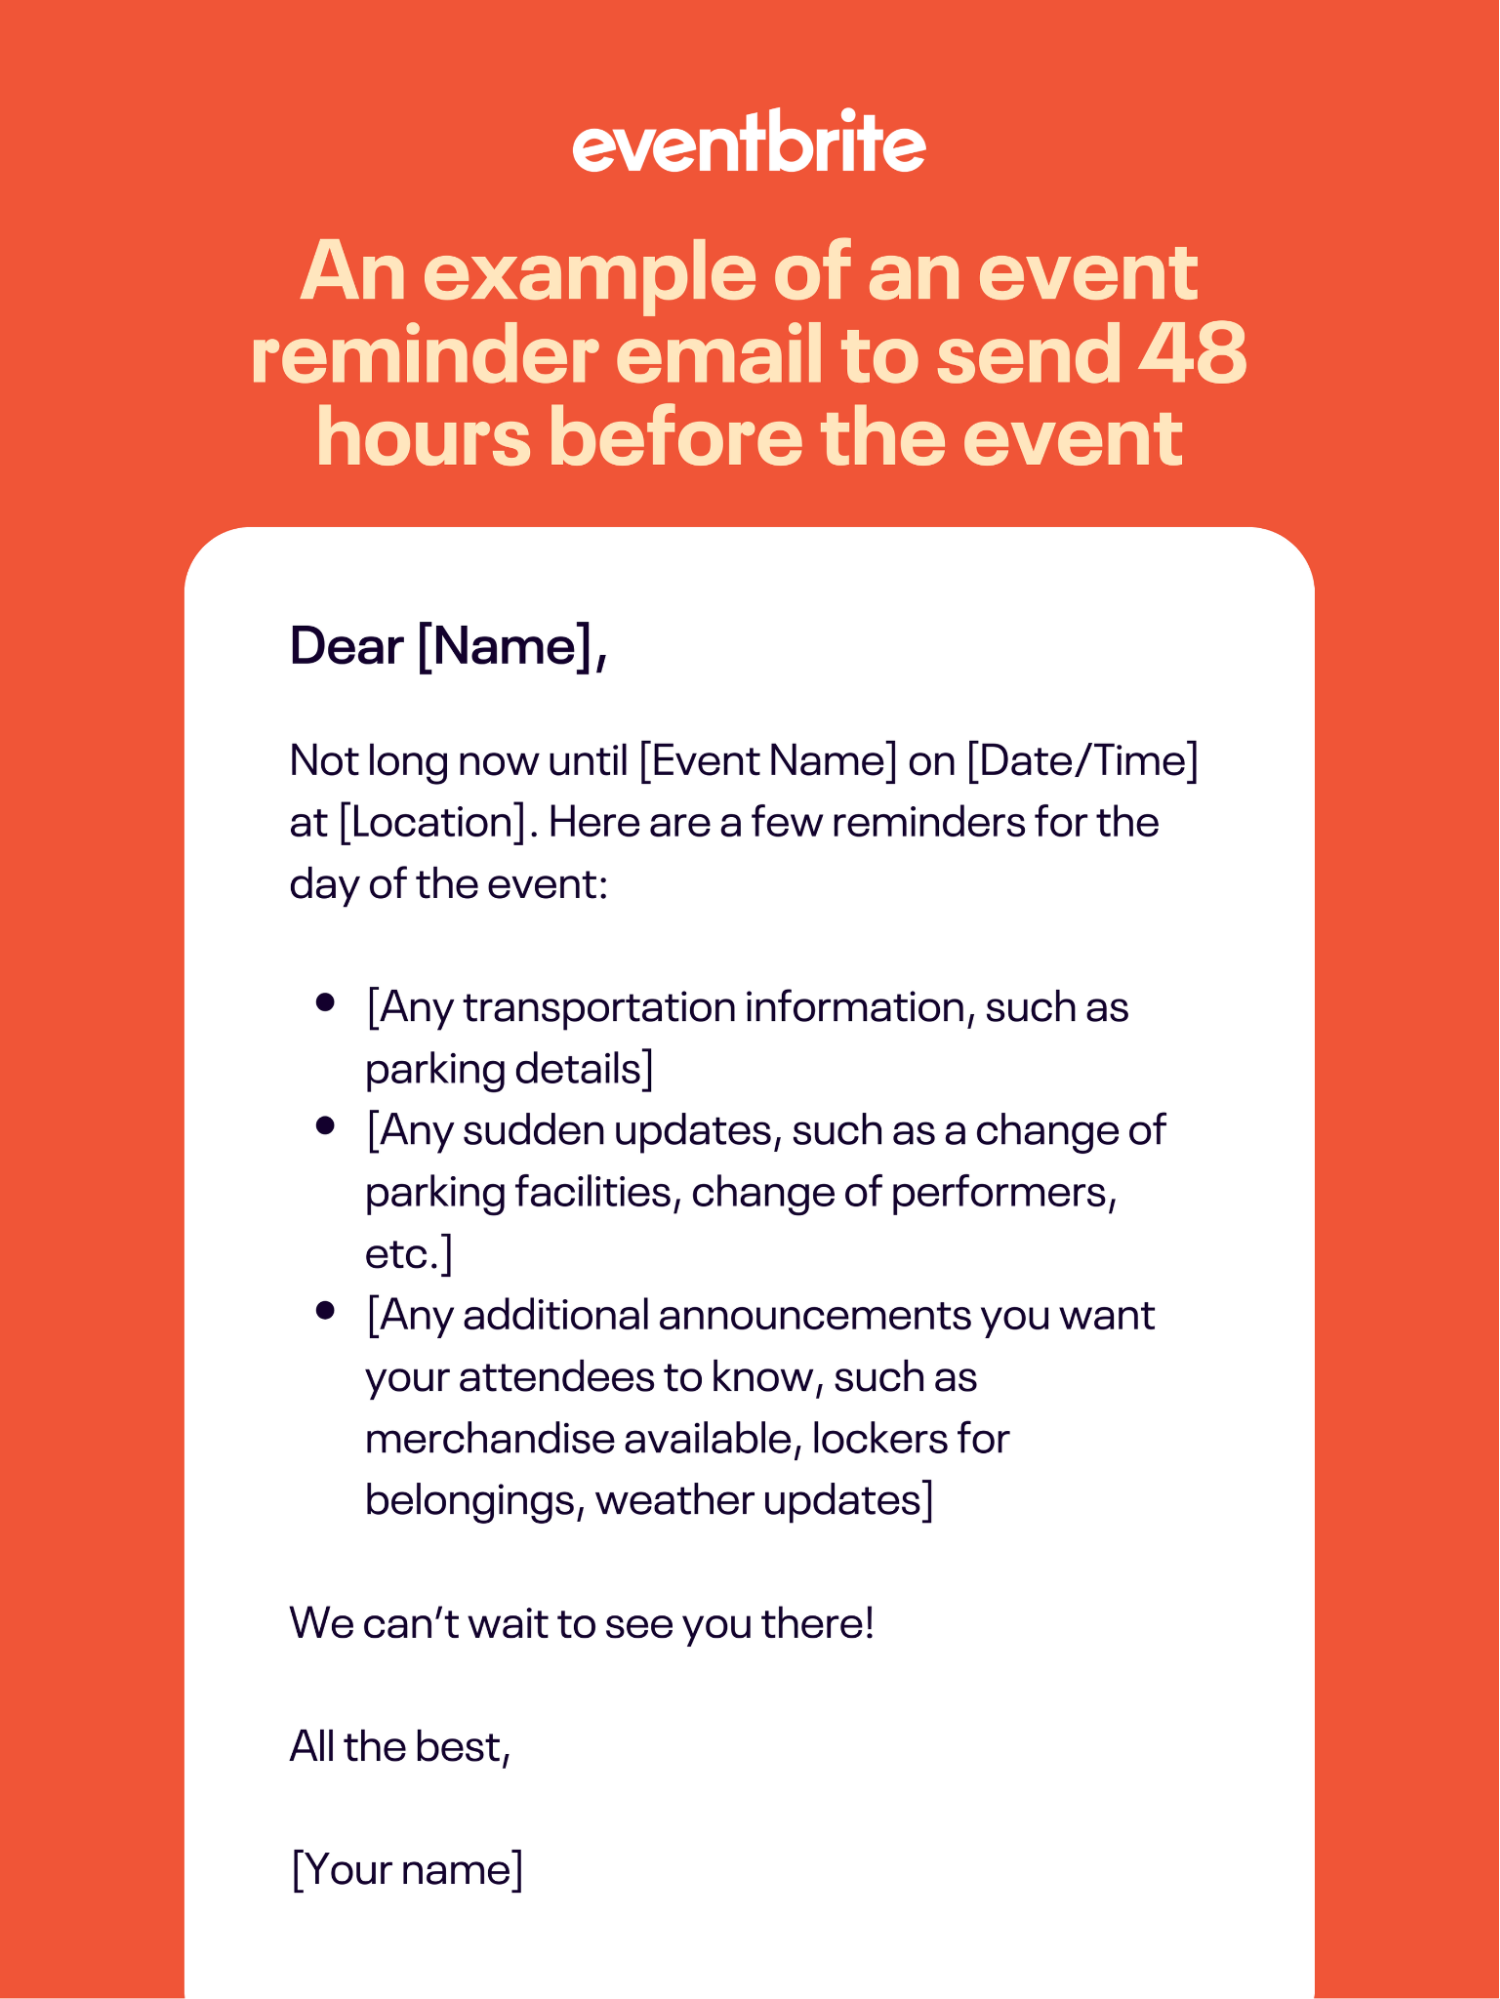 Event reminder email example 48h before